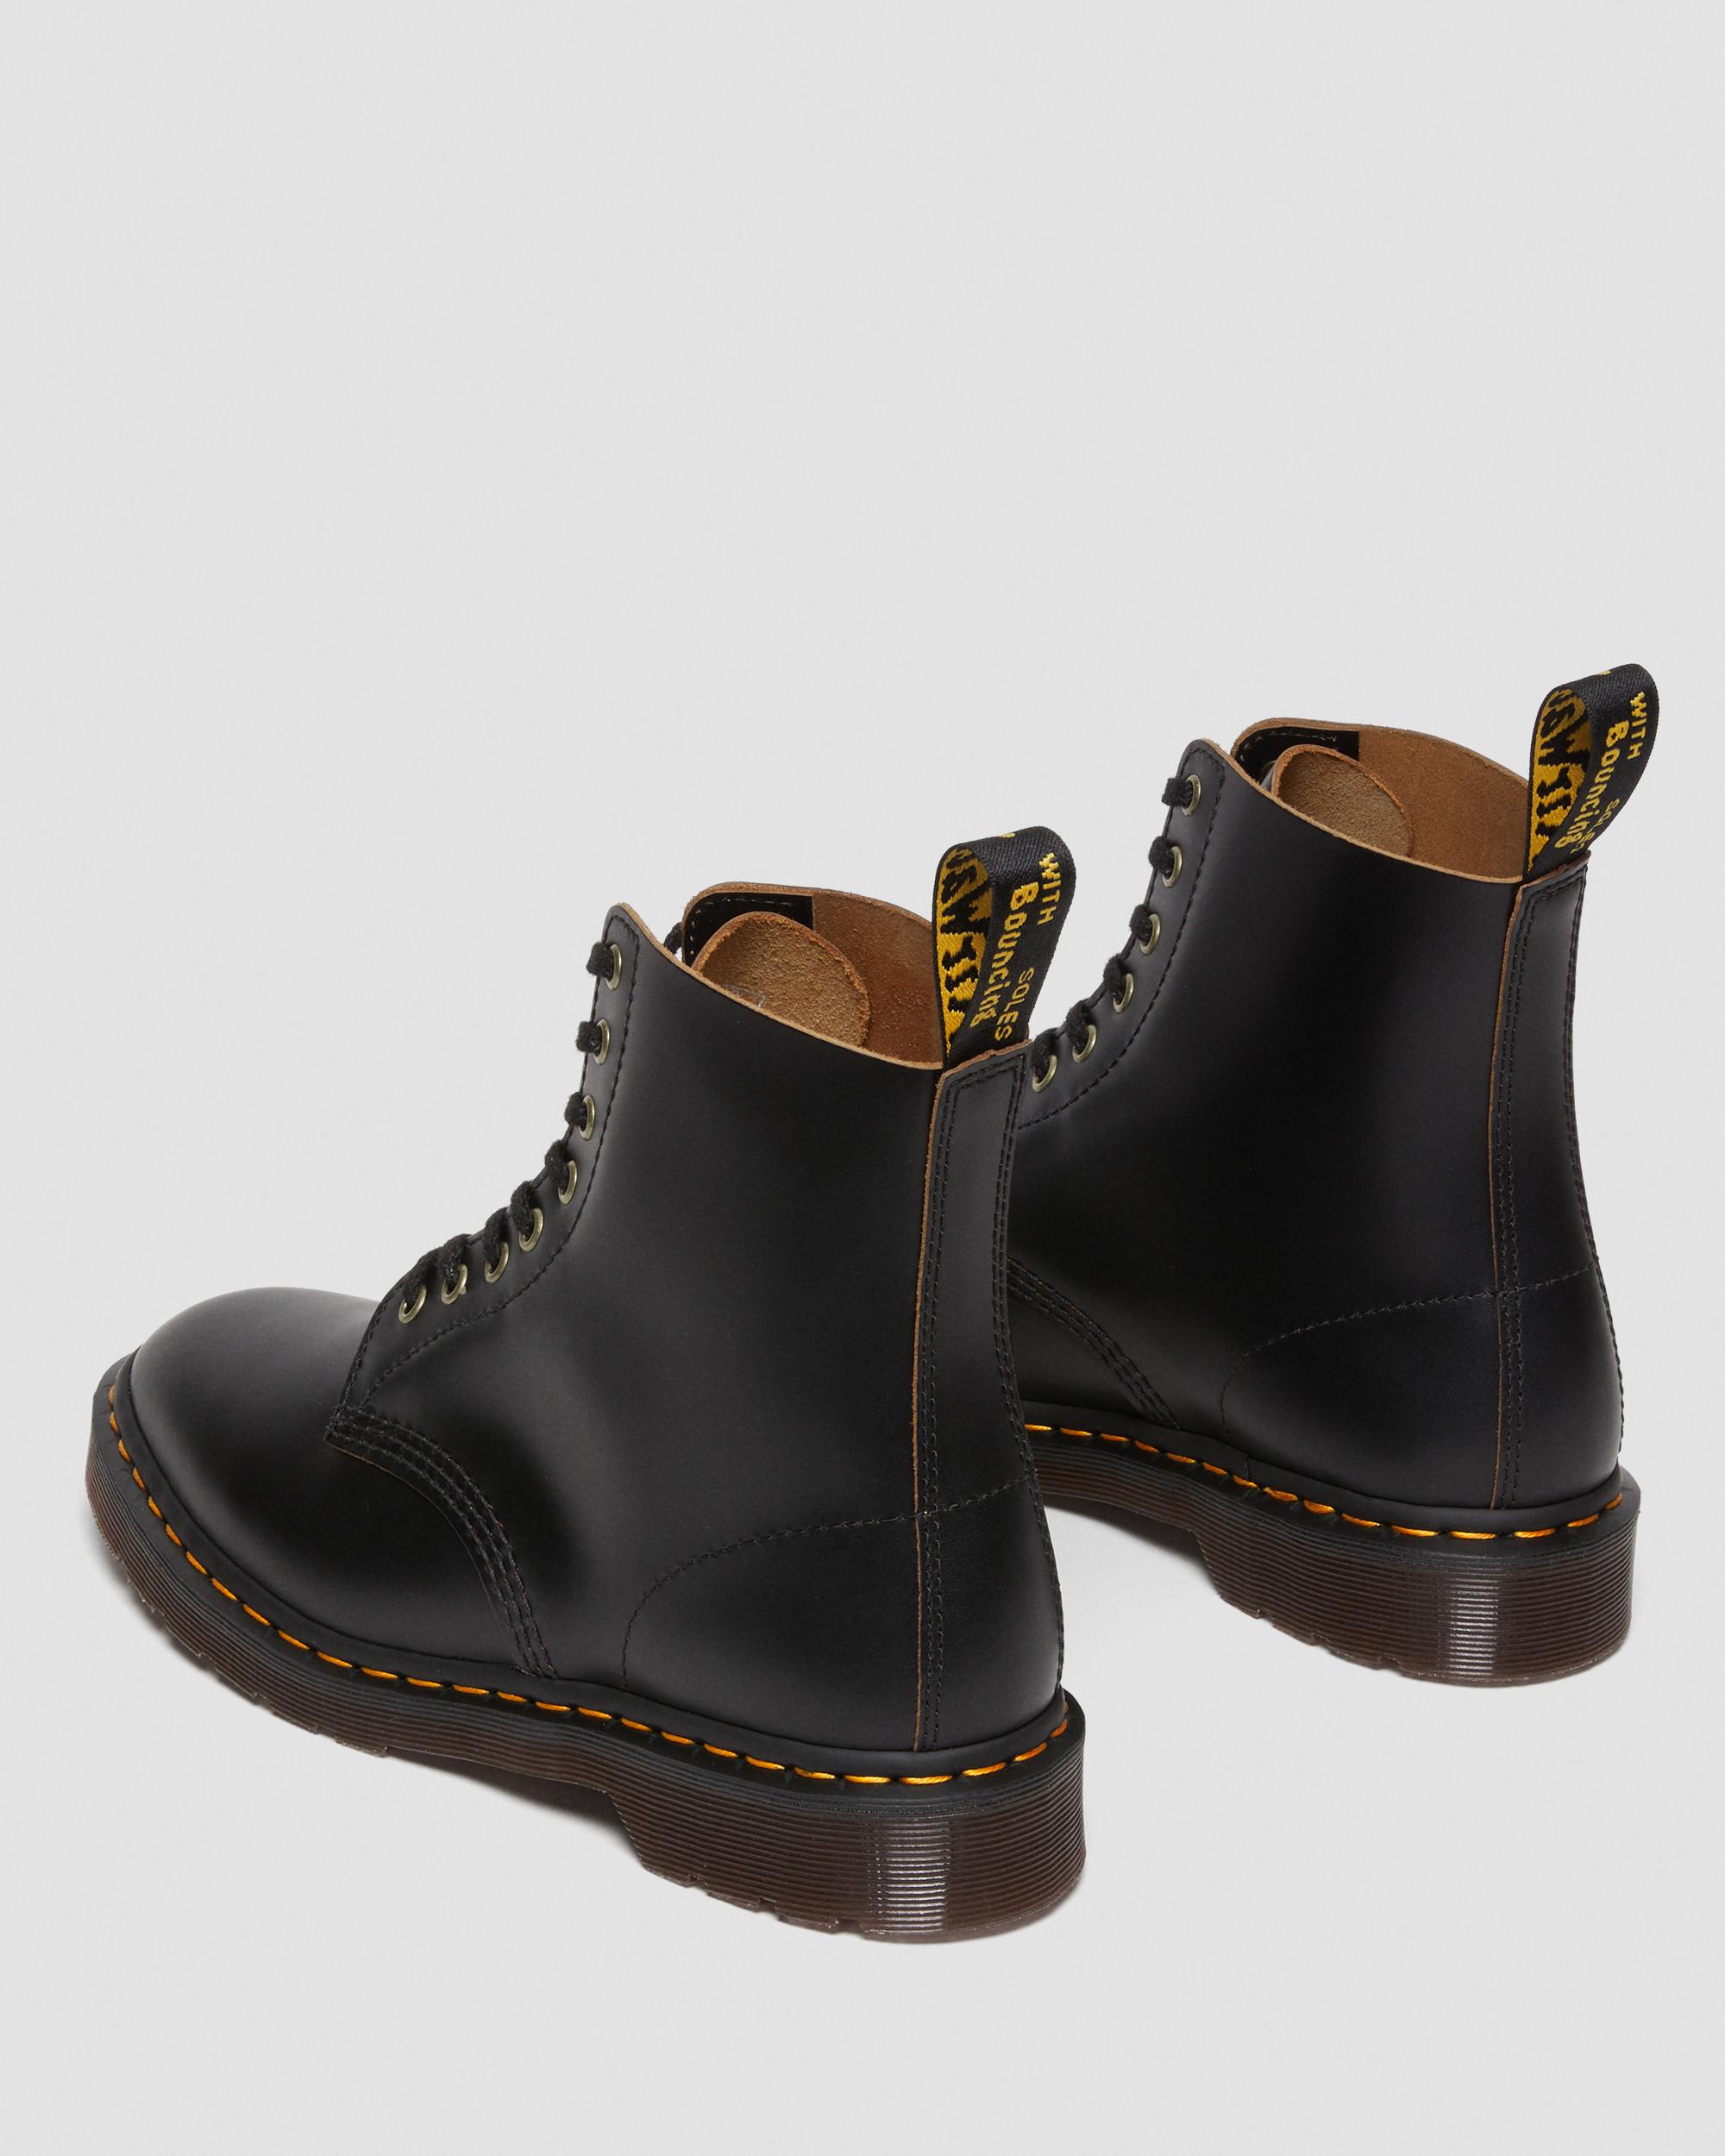 Smiths Vintage Smooth Leather Boots in Black